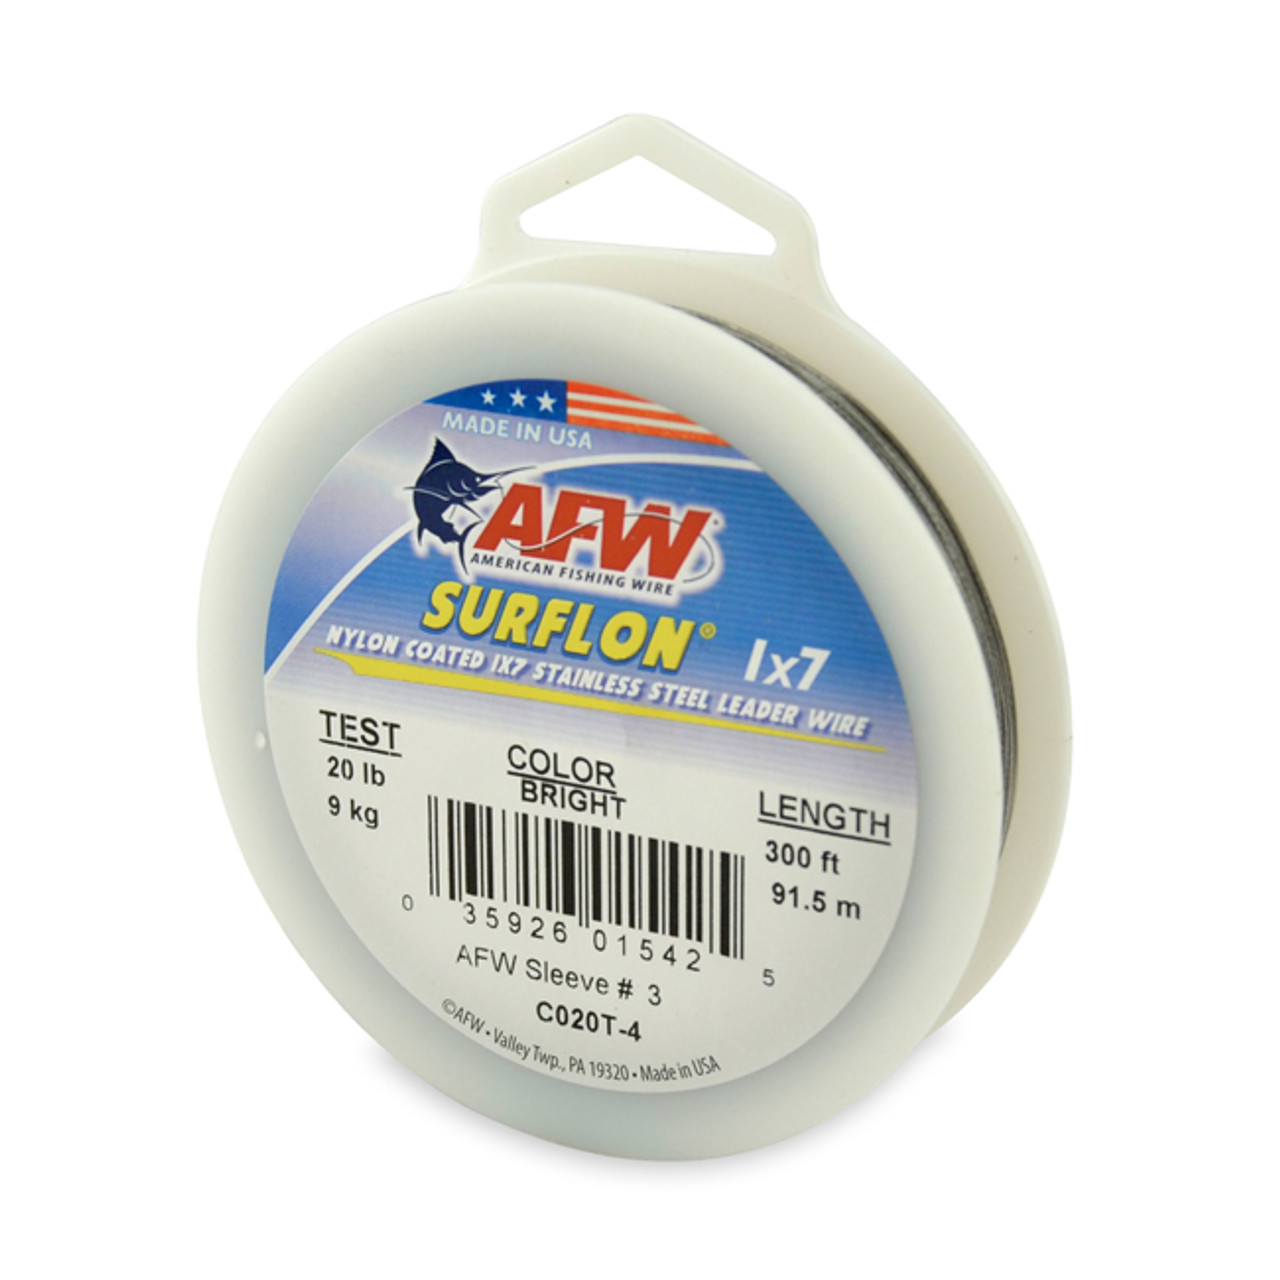 American Fishing Wire Surflon Nyon Coated 1x7 Stainless Steel Leader Wire Bright / 30lb / 300ft